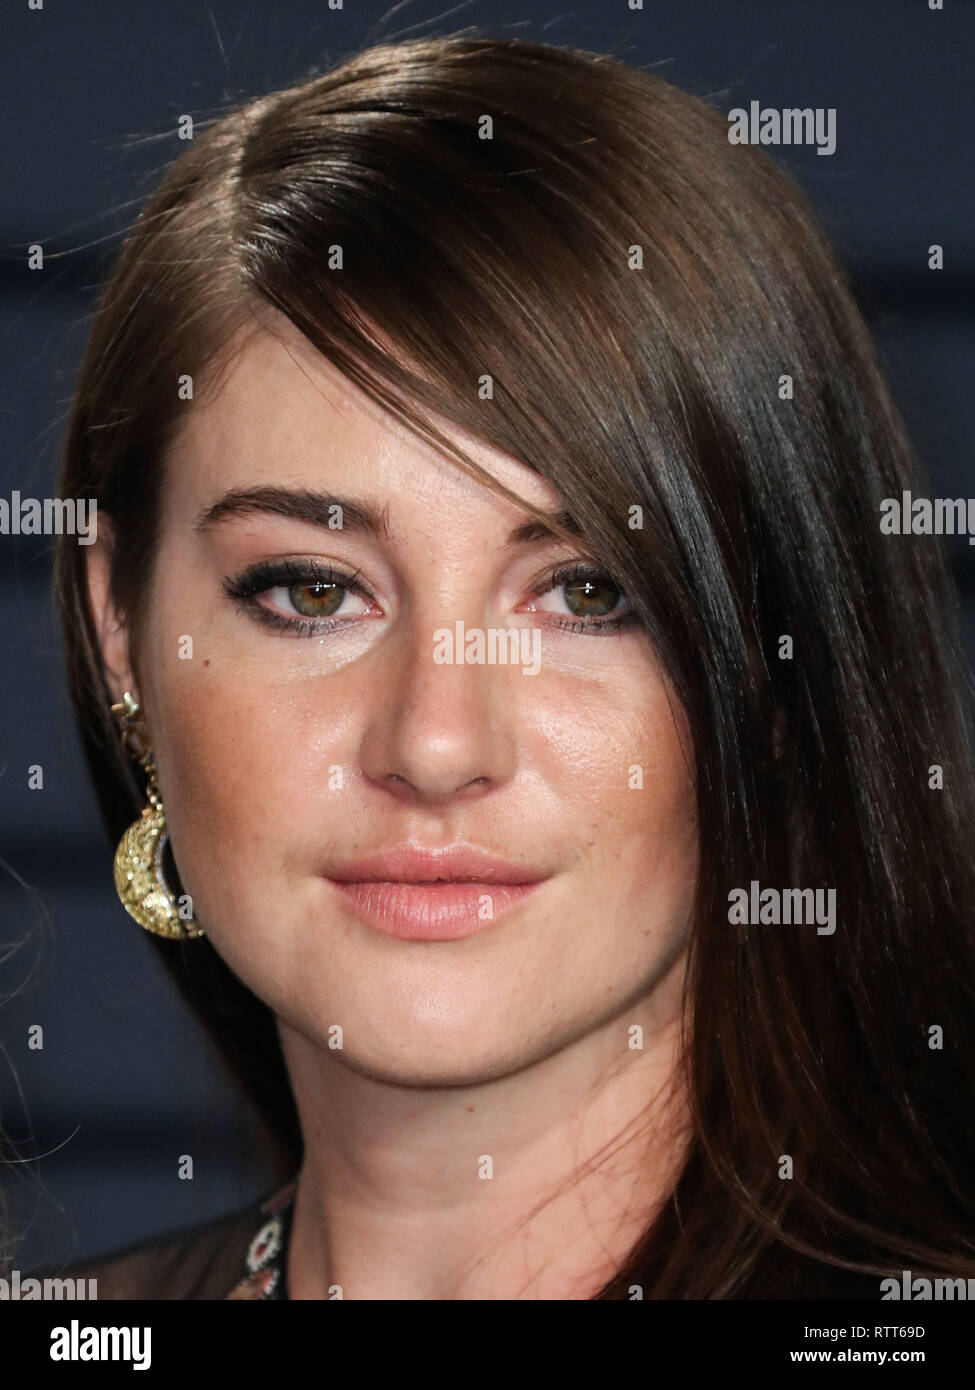 BEVERLY HILLS, LOS ANGELES, CA, USA - FEBRUARY 24: Actress Shailene Woodley wearing a Christian Dior dress, shoes, and clutch with Azza Fahmy jewelry arrives at the 2019 Vanity Fair Oscar Party held at the Wallis Annenberg Center for the Performing Arts on February 24, 2019 in Beverly Hills, Los Angeles, California, United States. (Photo by Xavier Collin/Image Press Agency) Stock Photo